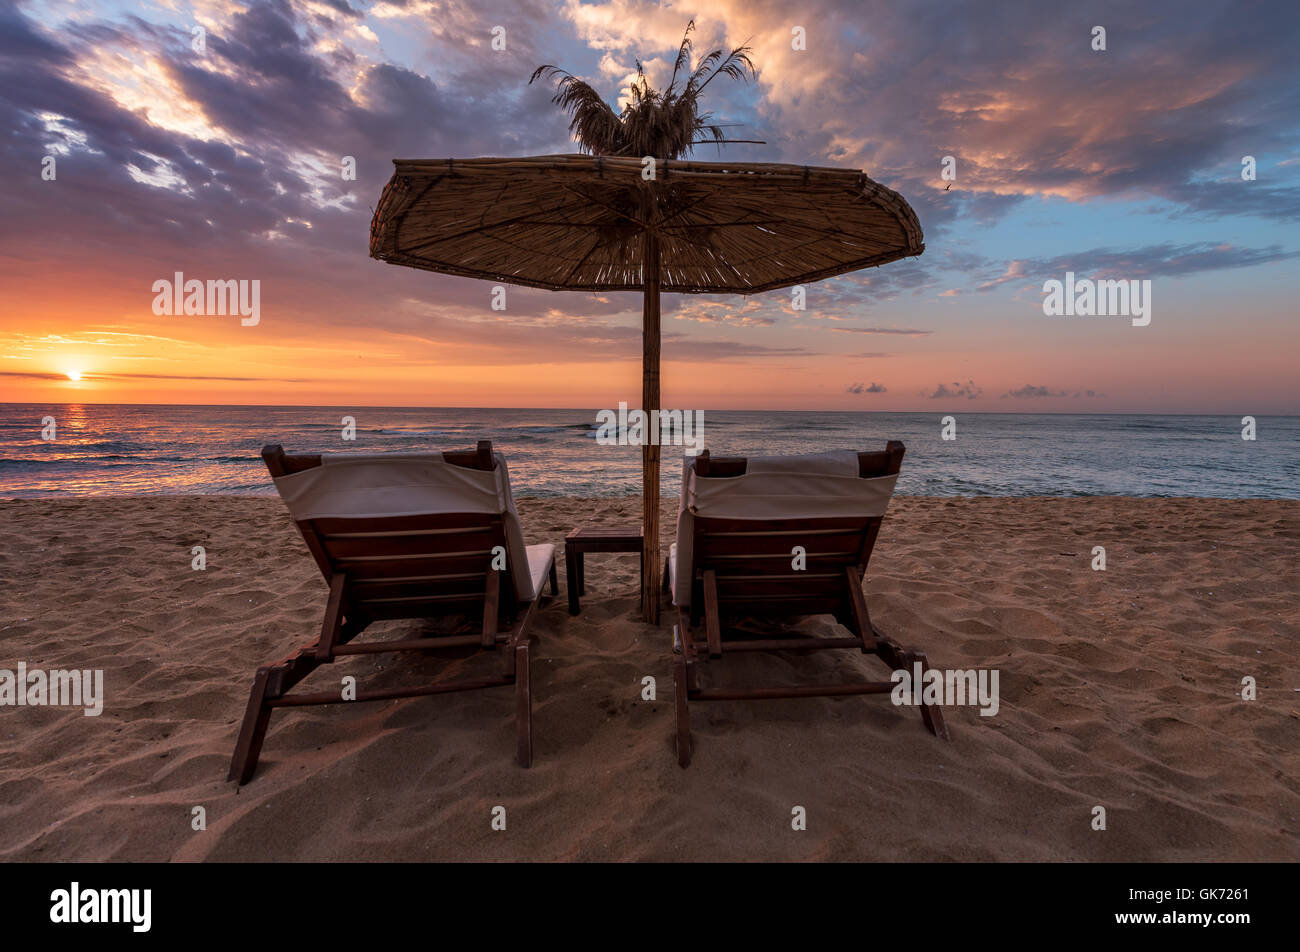 Back View Of Two Deckchairs, Sun Loungers Under Umbrella On Sand Beach. Stock Photo